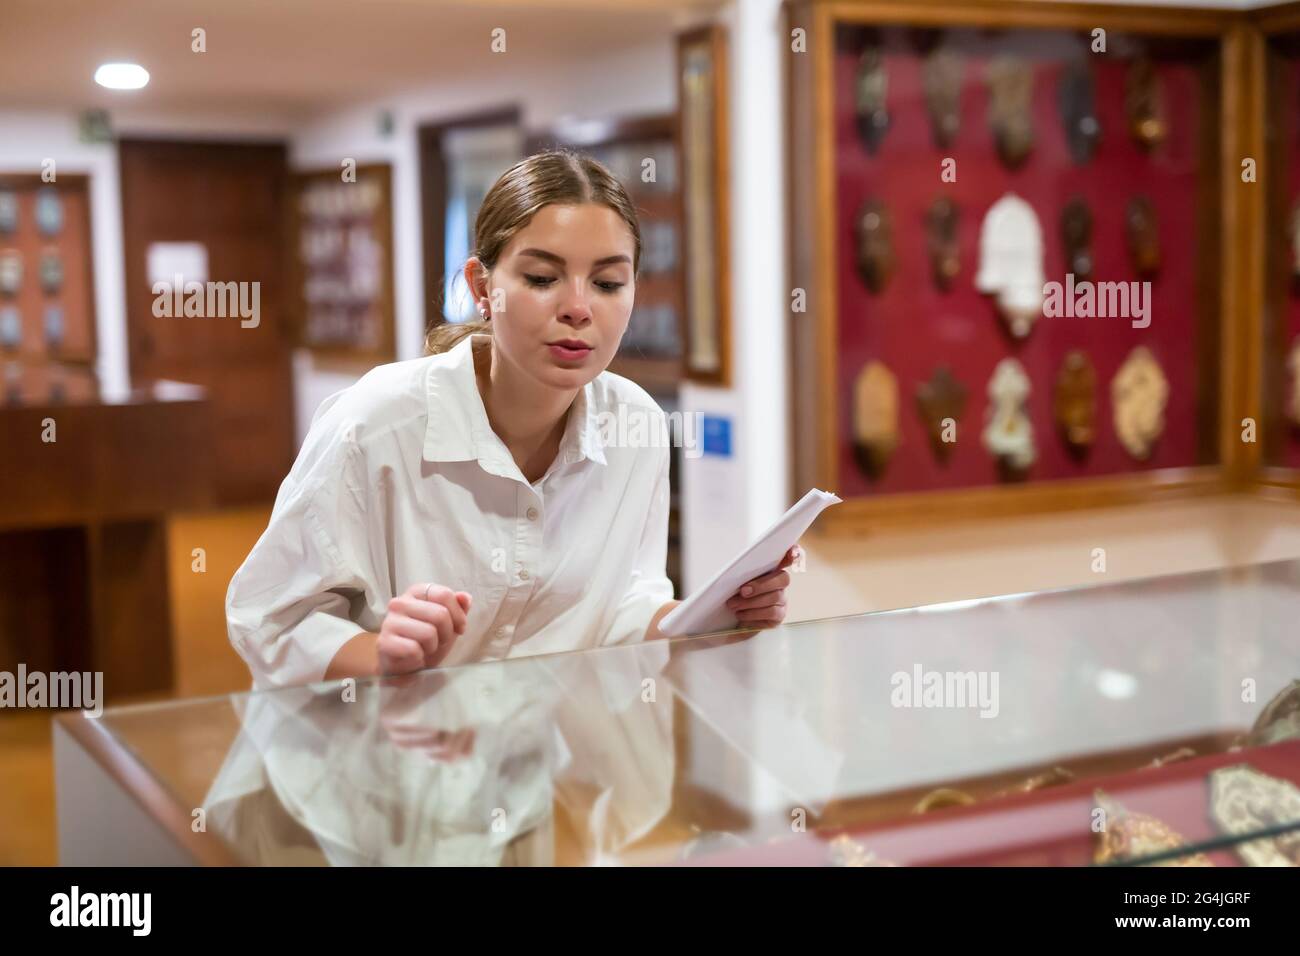 Woman looking at exhibits in glazed stands in museum Stock Photo